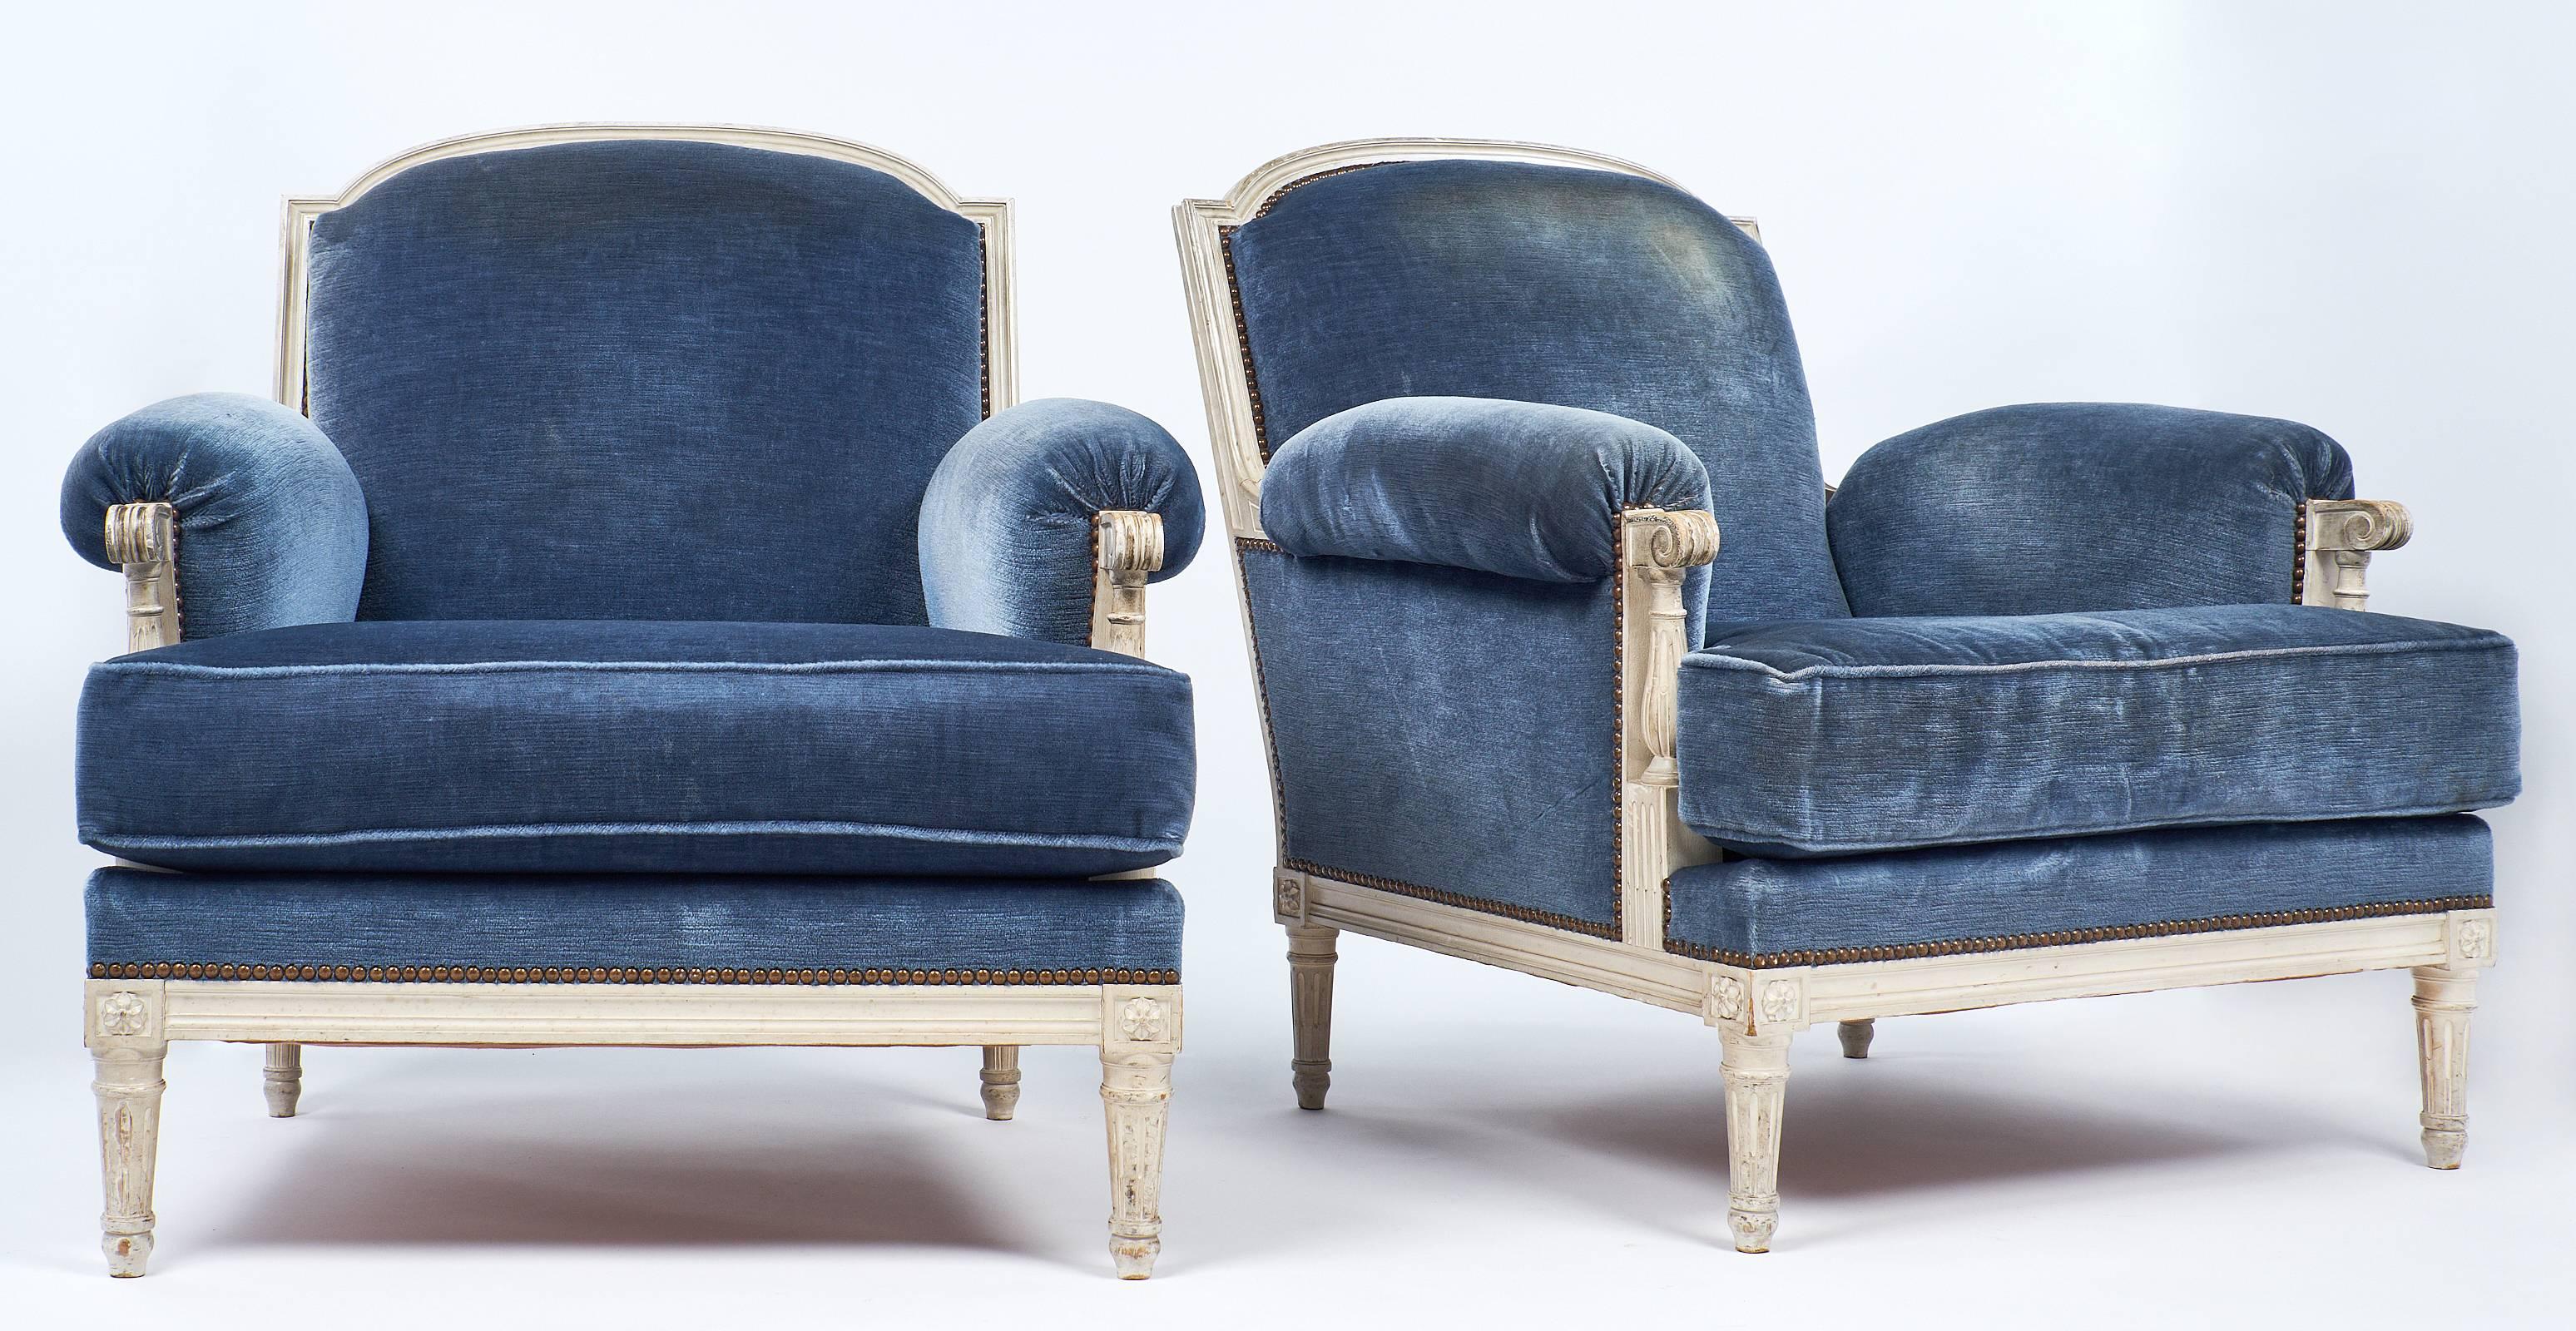 French antique Louis XVI style bergères made of painted and patinated beech wood with hand-carved designs. The blue velvet is in decent condition. These chairs are very comfortable and strong! 

